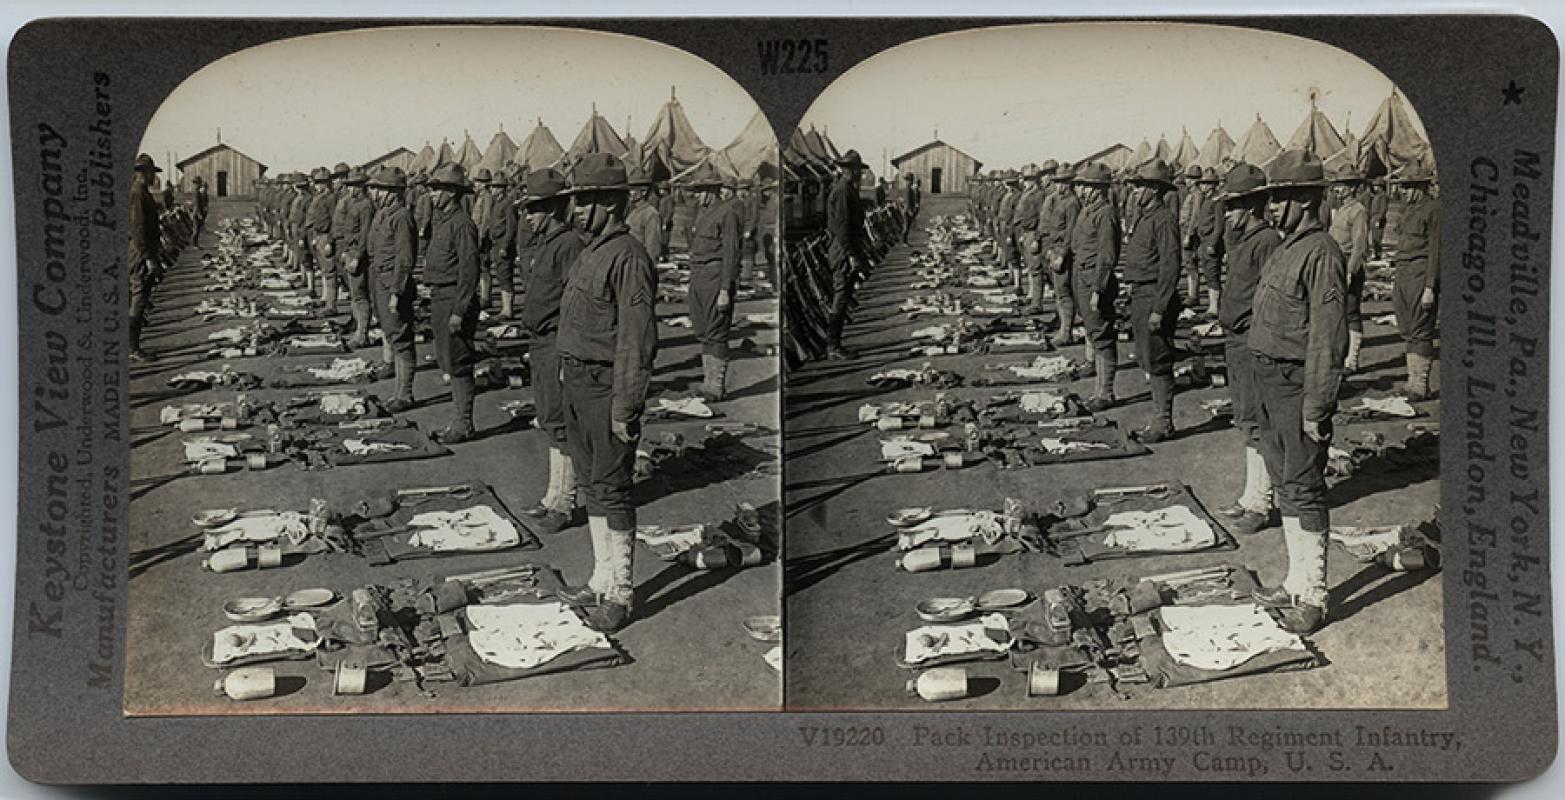 Soldiers have their packs inspected at a field camp.